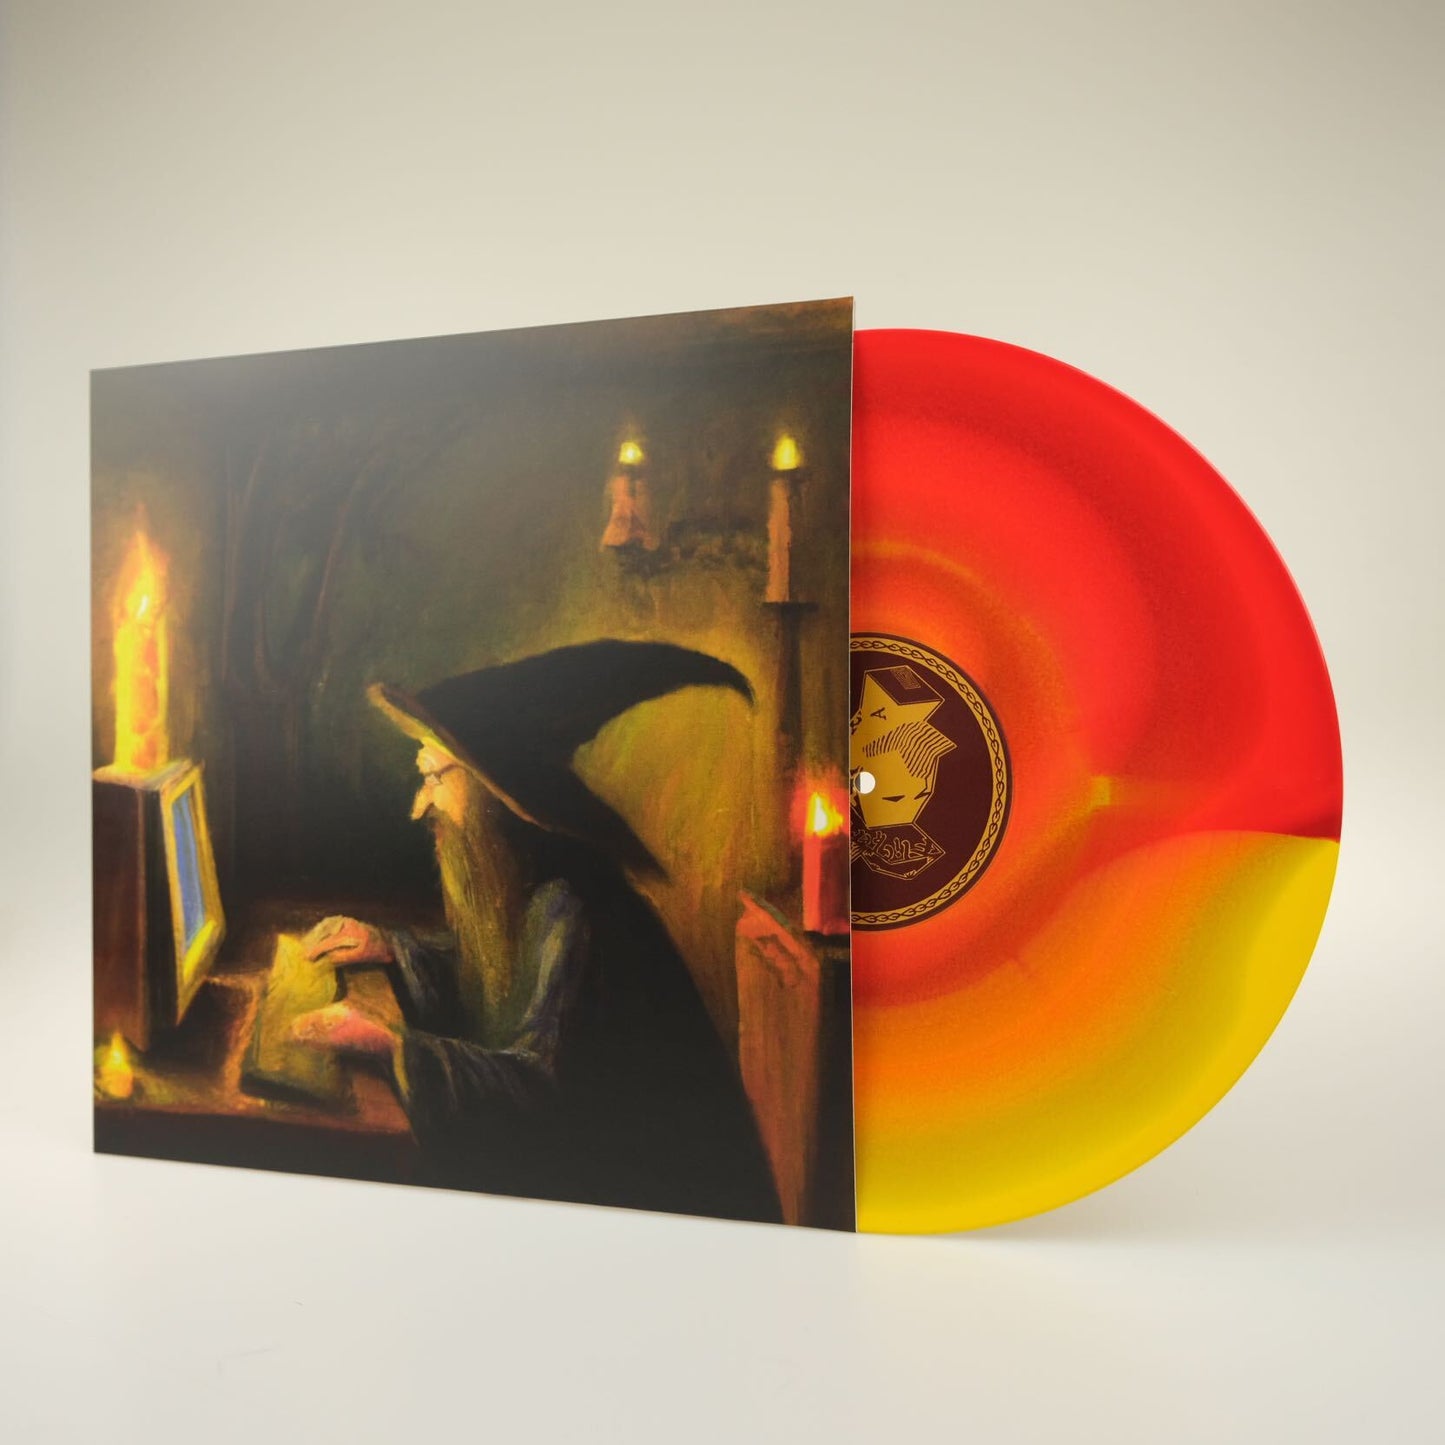 [SOLD OUT] FLICKERS FROM THE FEN "Stoned in Gielinor" vinyl LP (color, 180g)